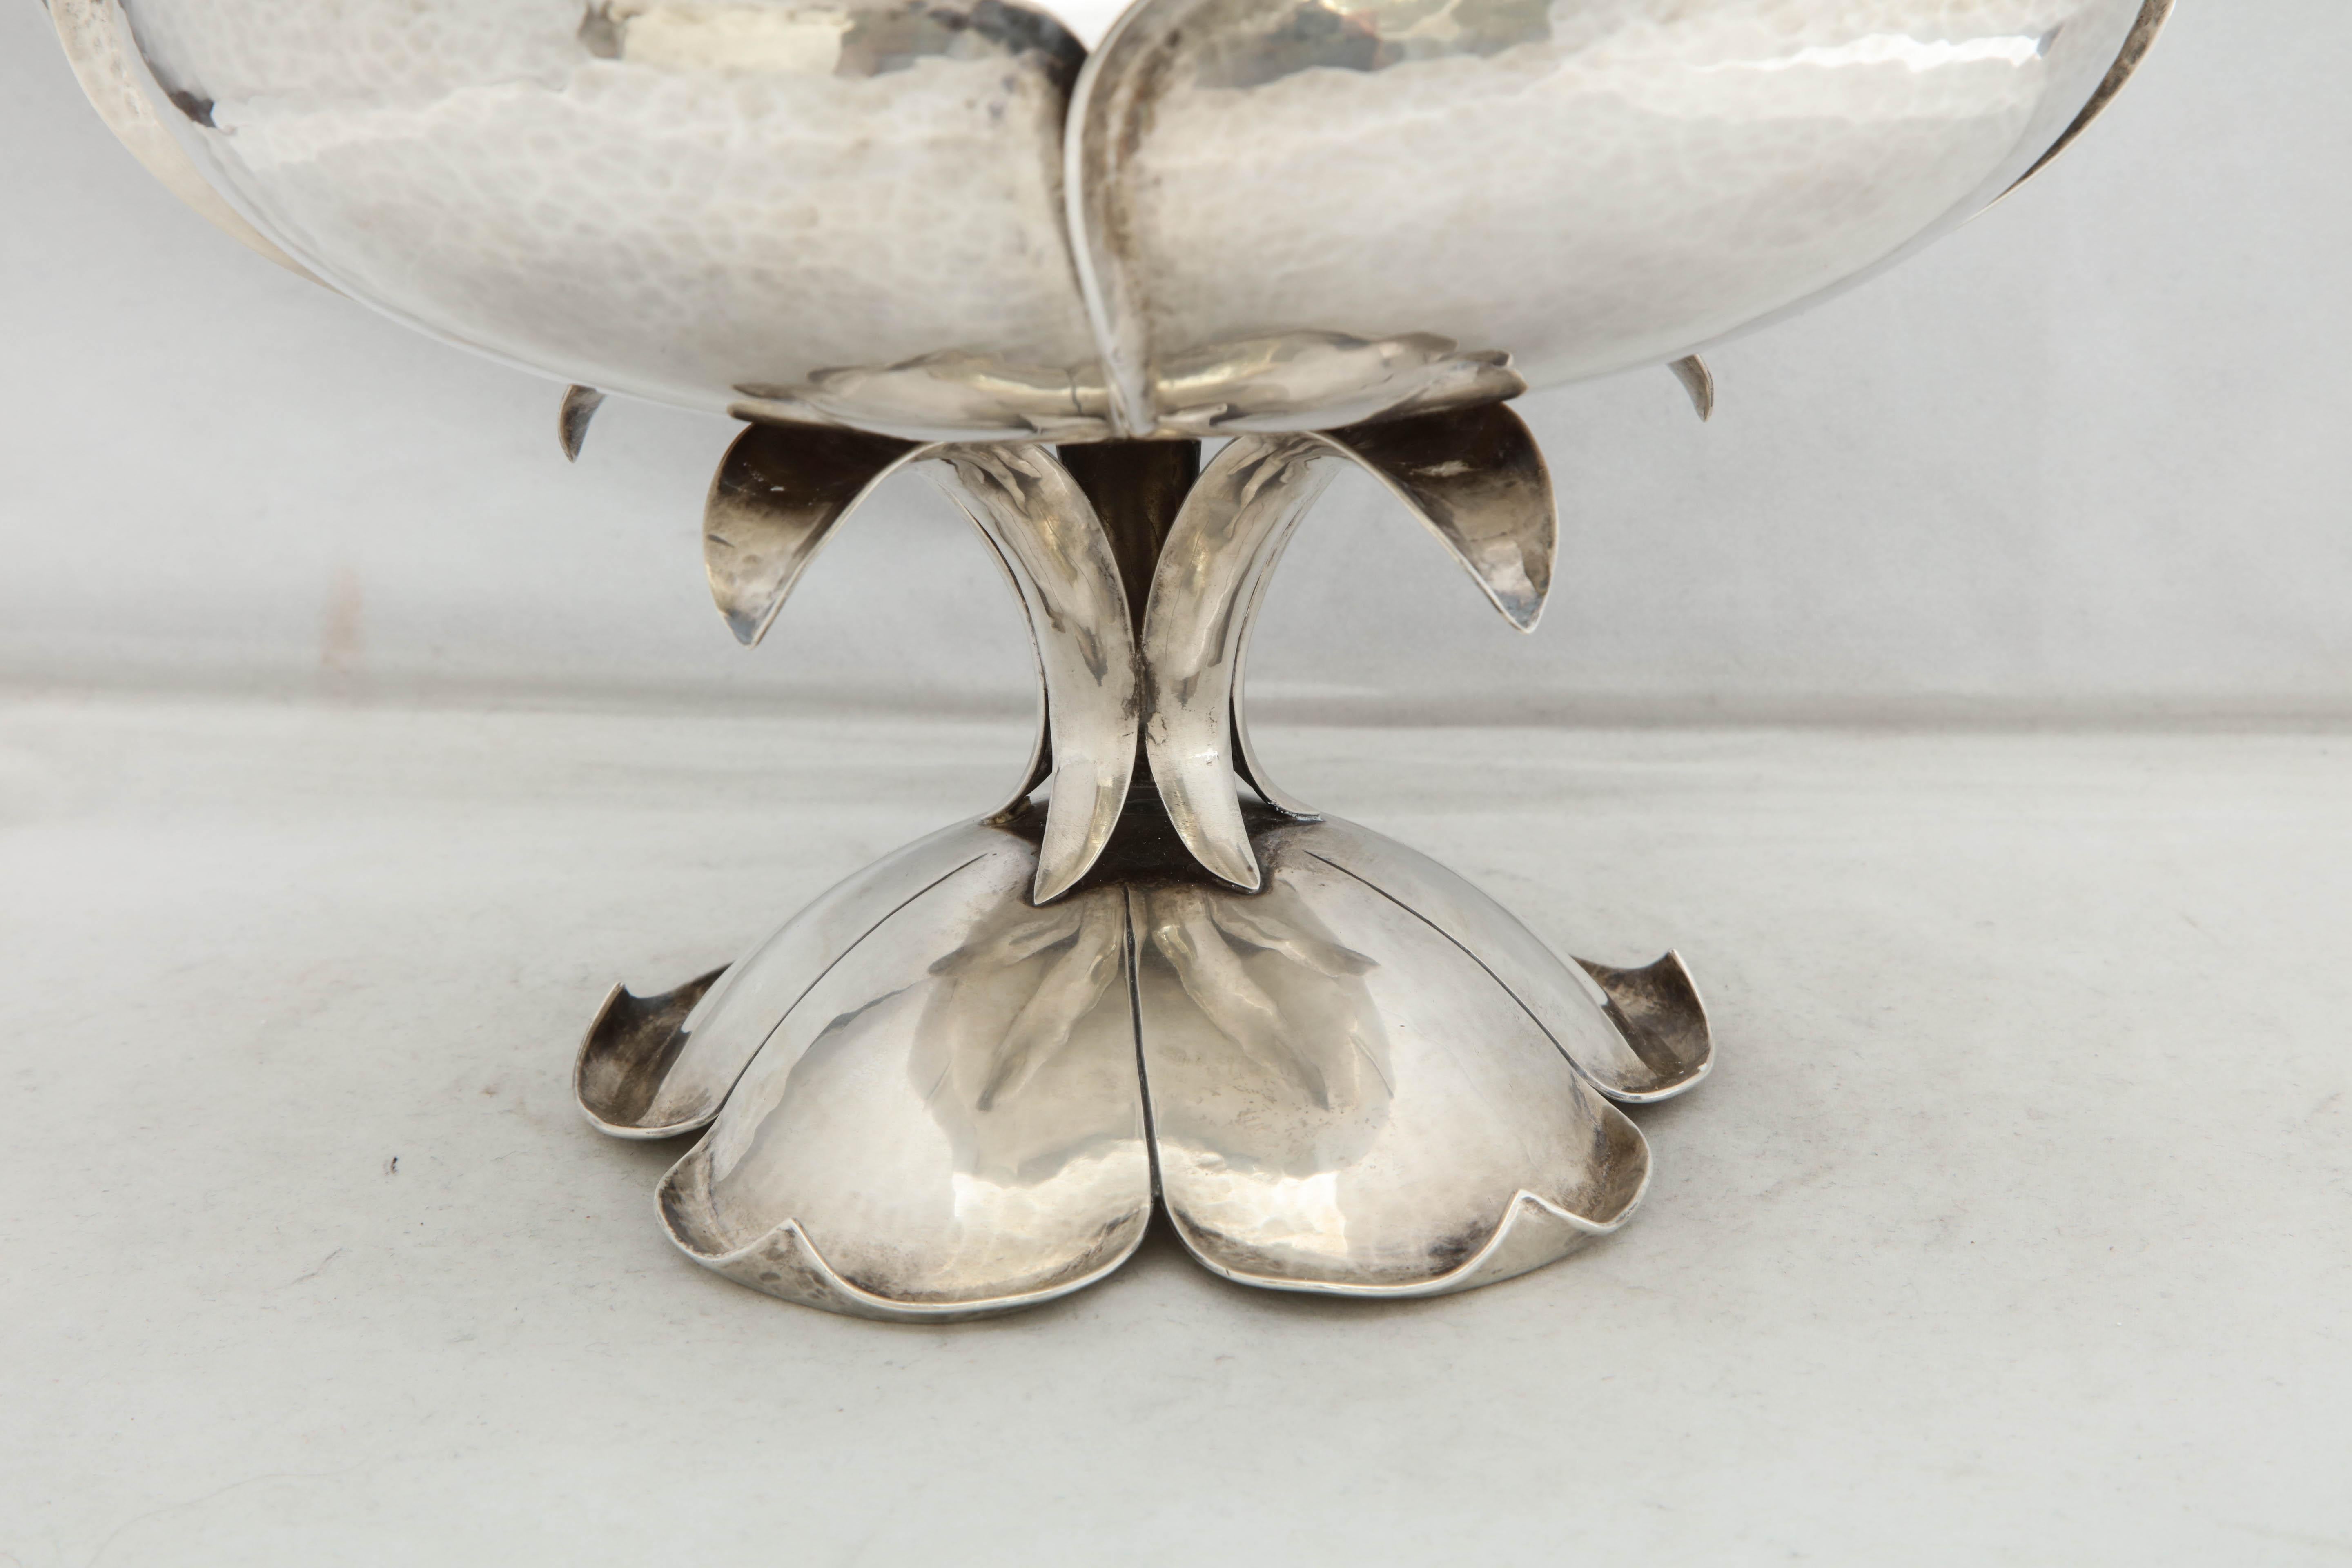 Hammered Arts & Crafts Sterling Silver Lotus-Form Centerpiece Bowl by The Cellini Shop